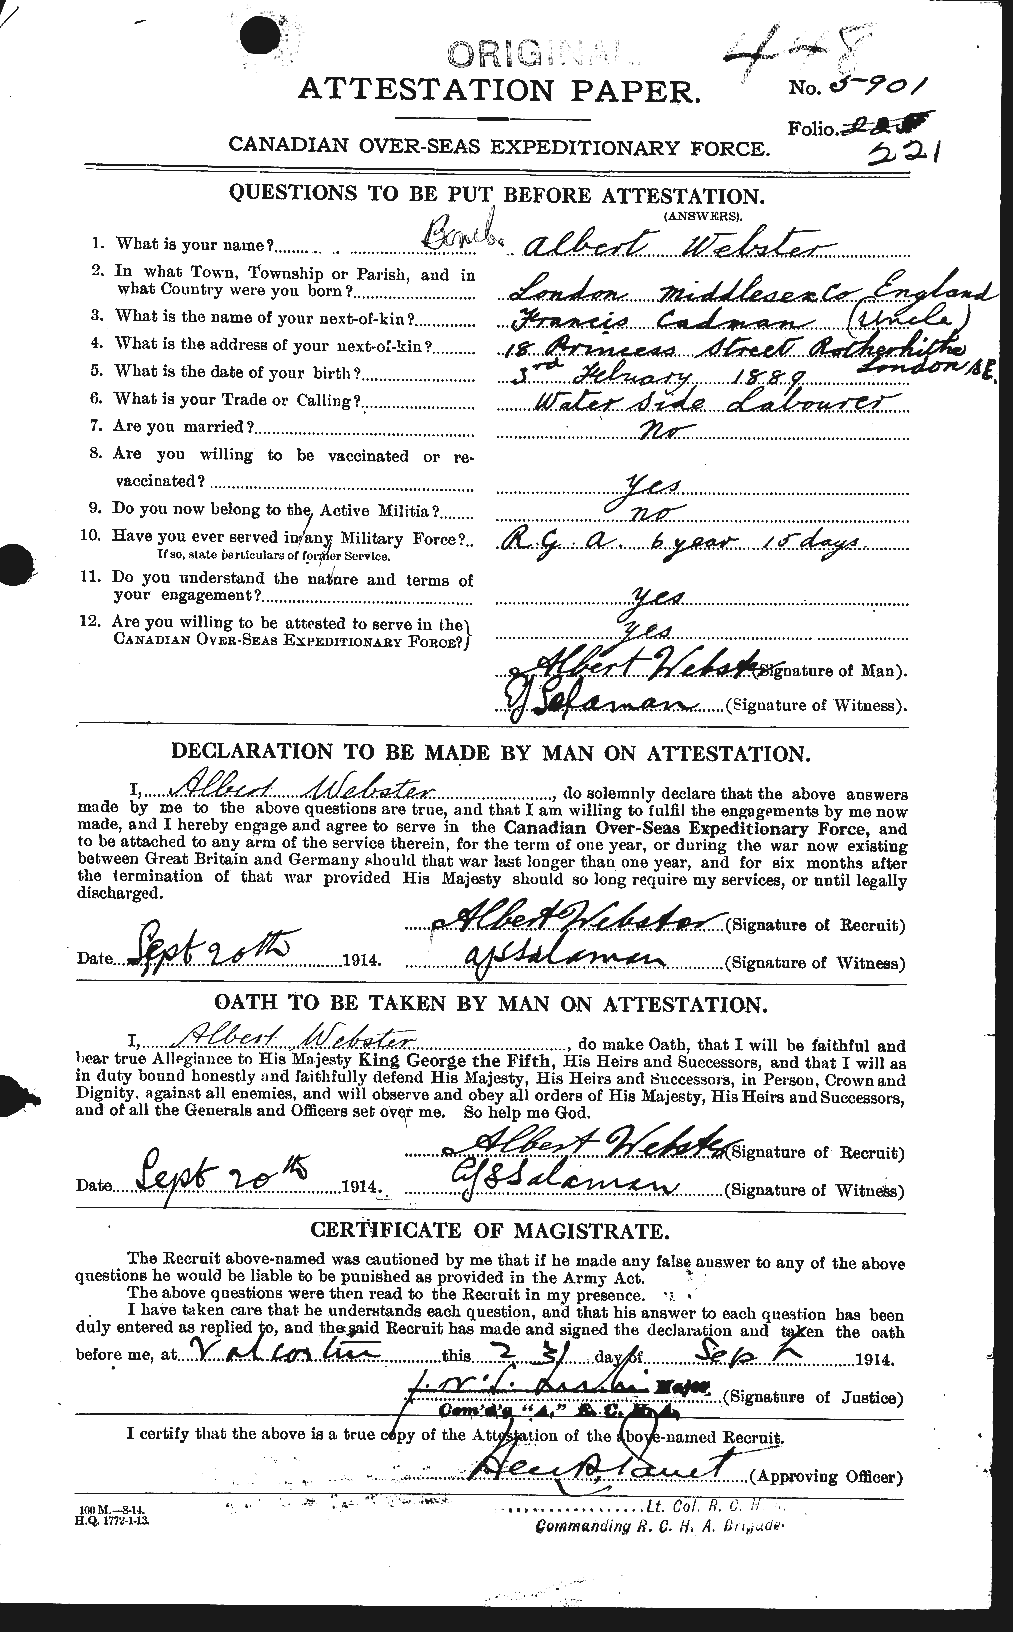 Personnel Records of the First World War - CEF 670226a